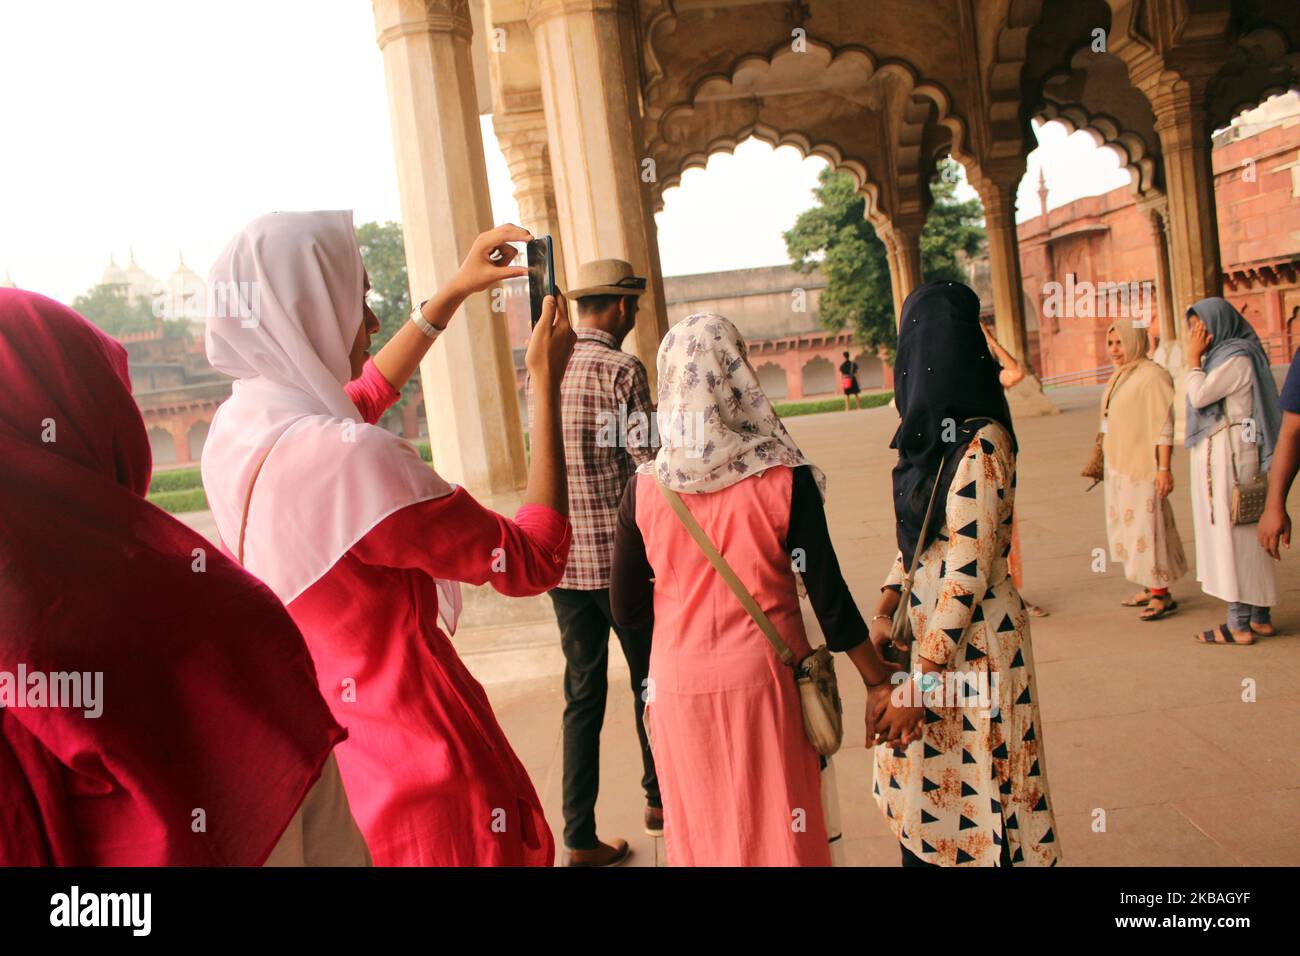 Tourists visit the Agra fort at Rakabganj area in Agra, Uttar Pradesh, India on November 08, 2019. It was the main residence of the emperors of the Mughal Dynasty until 1638, when the capital was shifted from Agra to Delhi. (Photo by Mayank Makhija/NurPhoto) Stock Photo